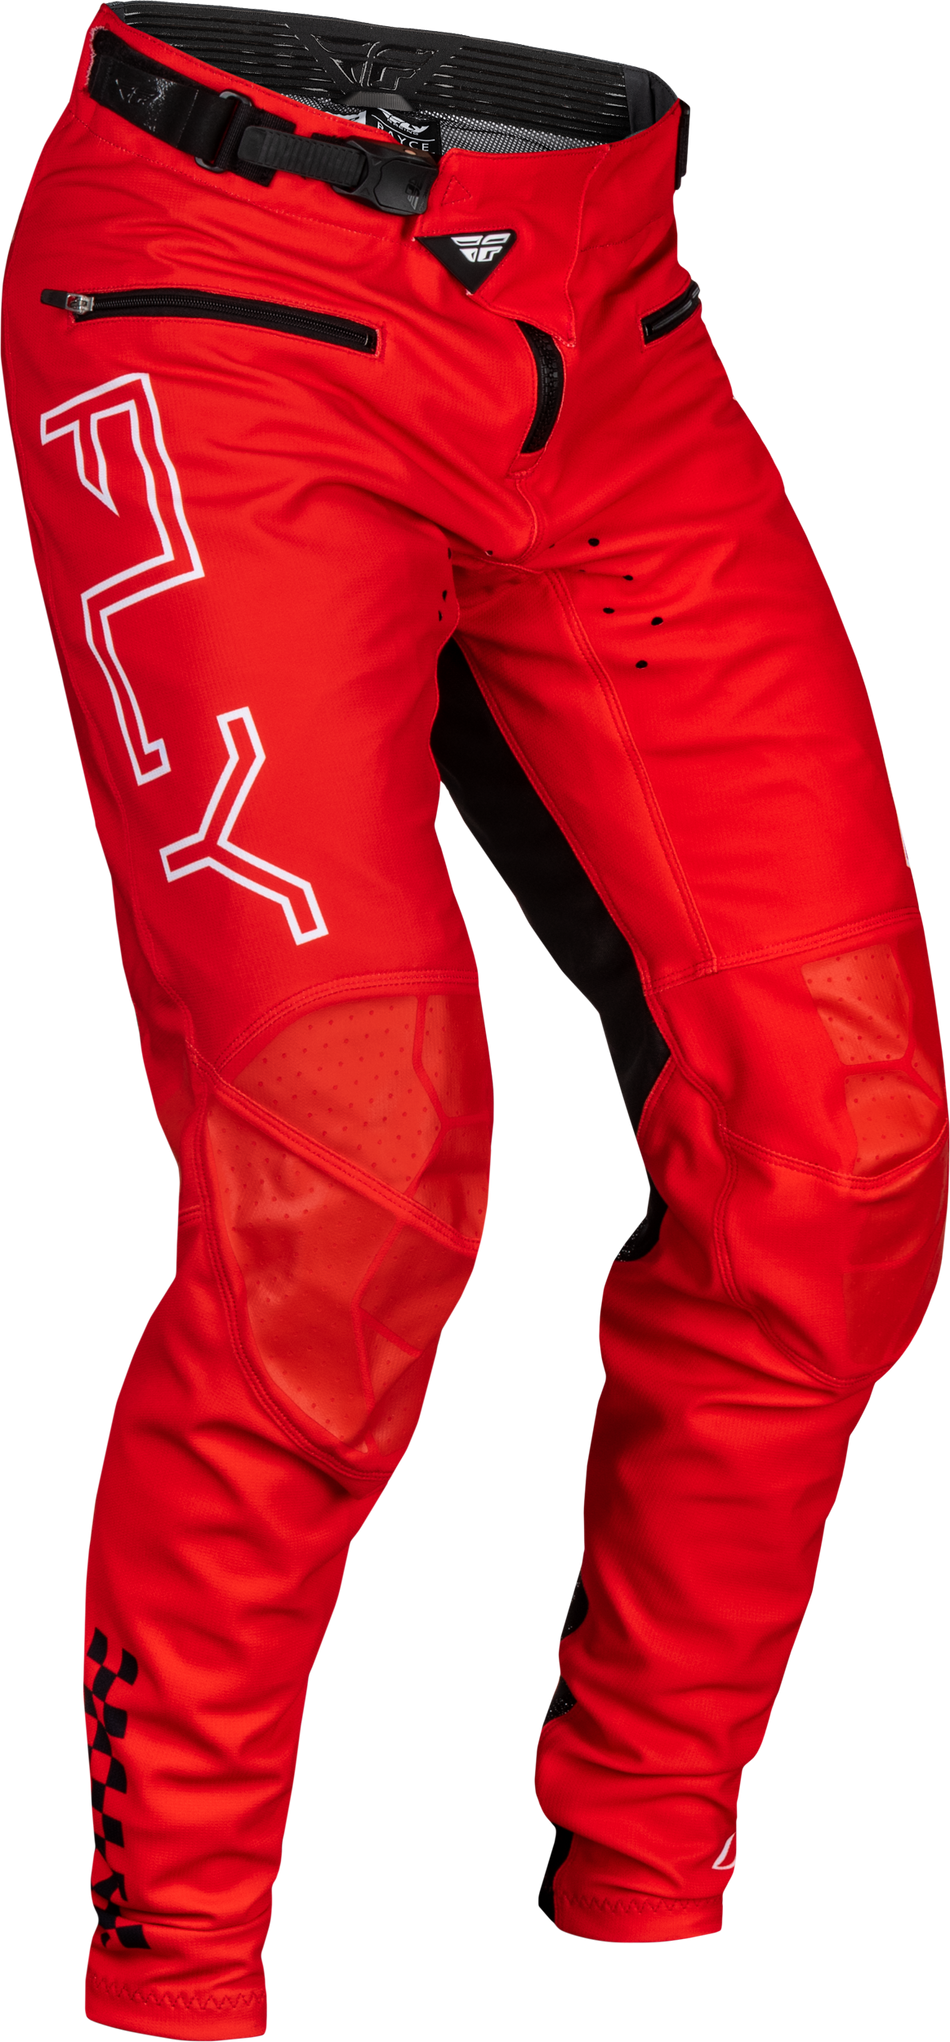 FLY RACING Youth Rayce Bicycle Pants Red Sz 18 377-06318